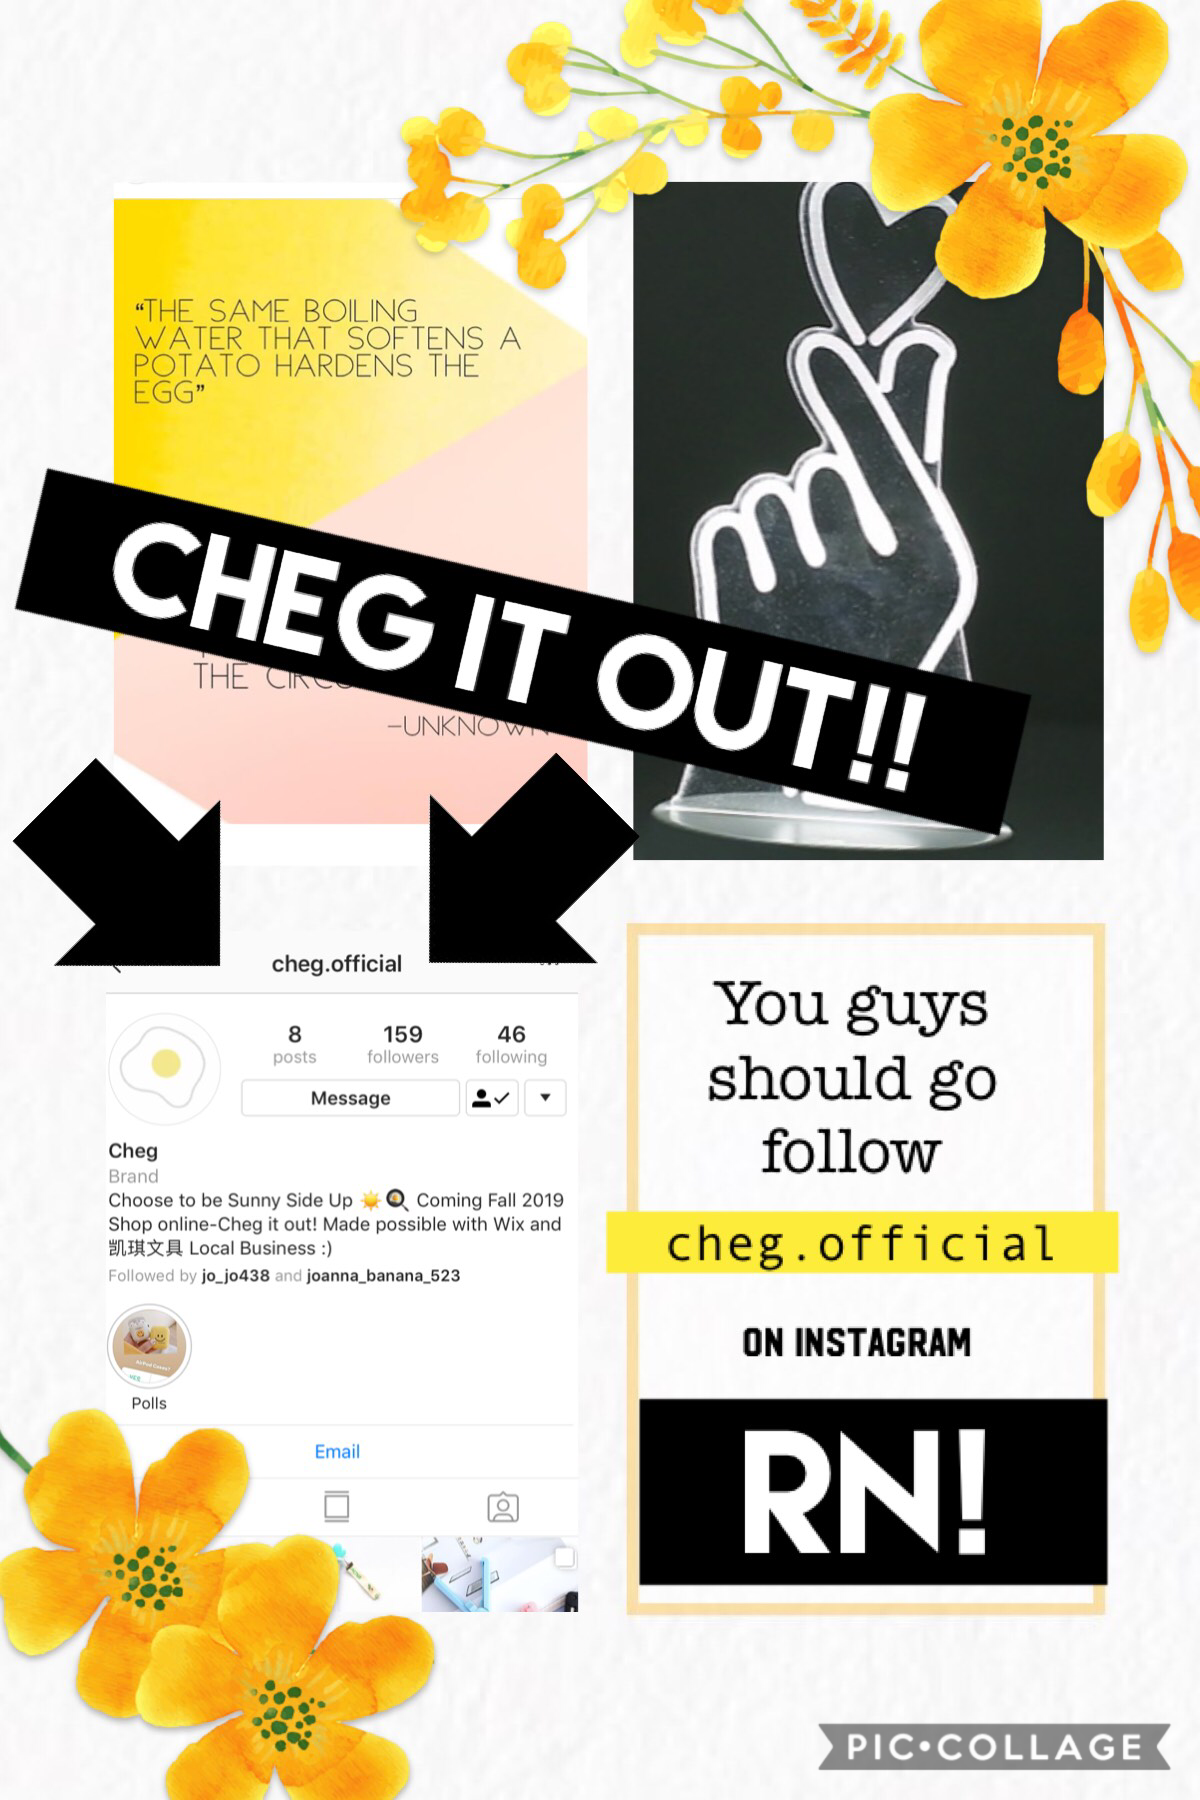 CHEG IT OUT! New business coming in the fall!❤️😄